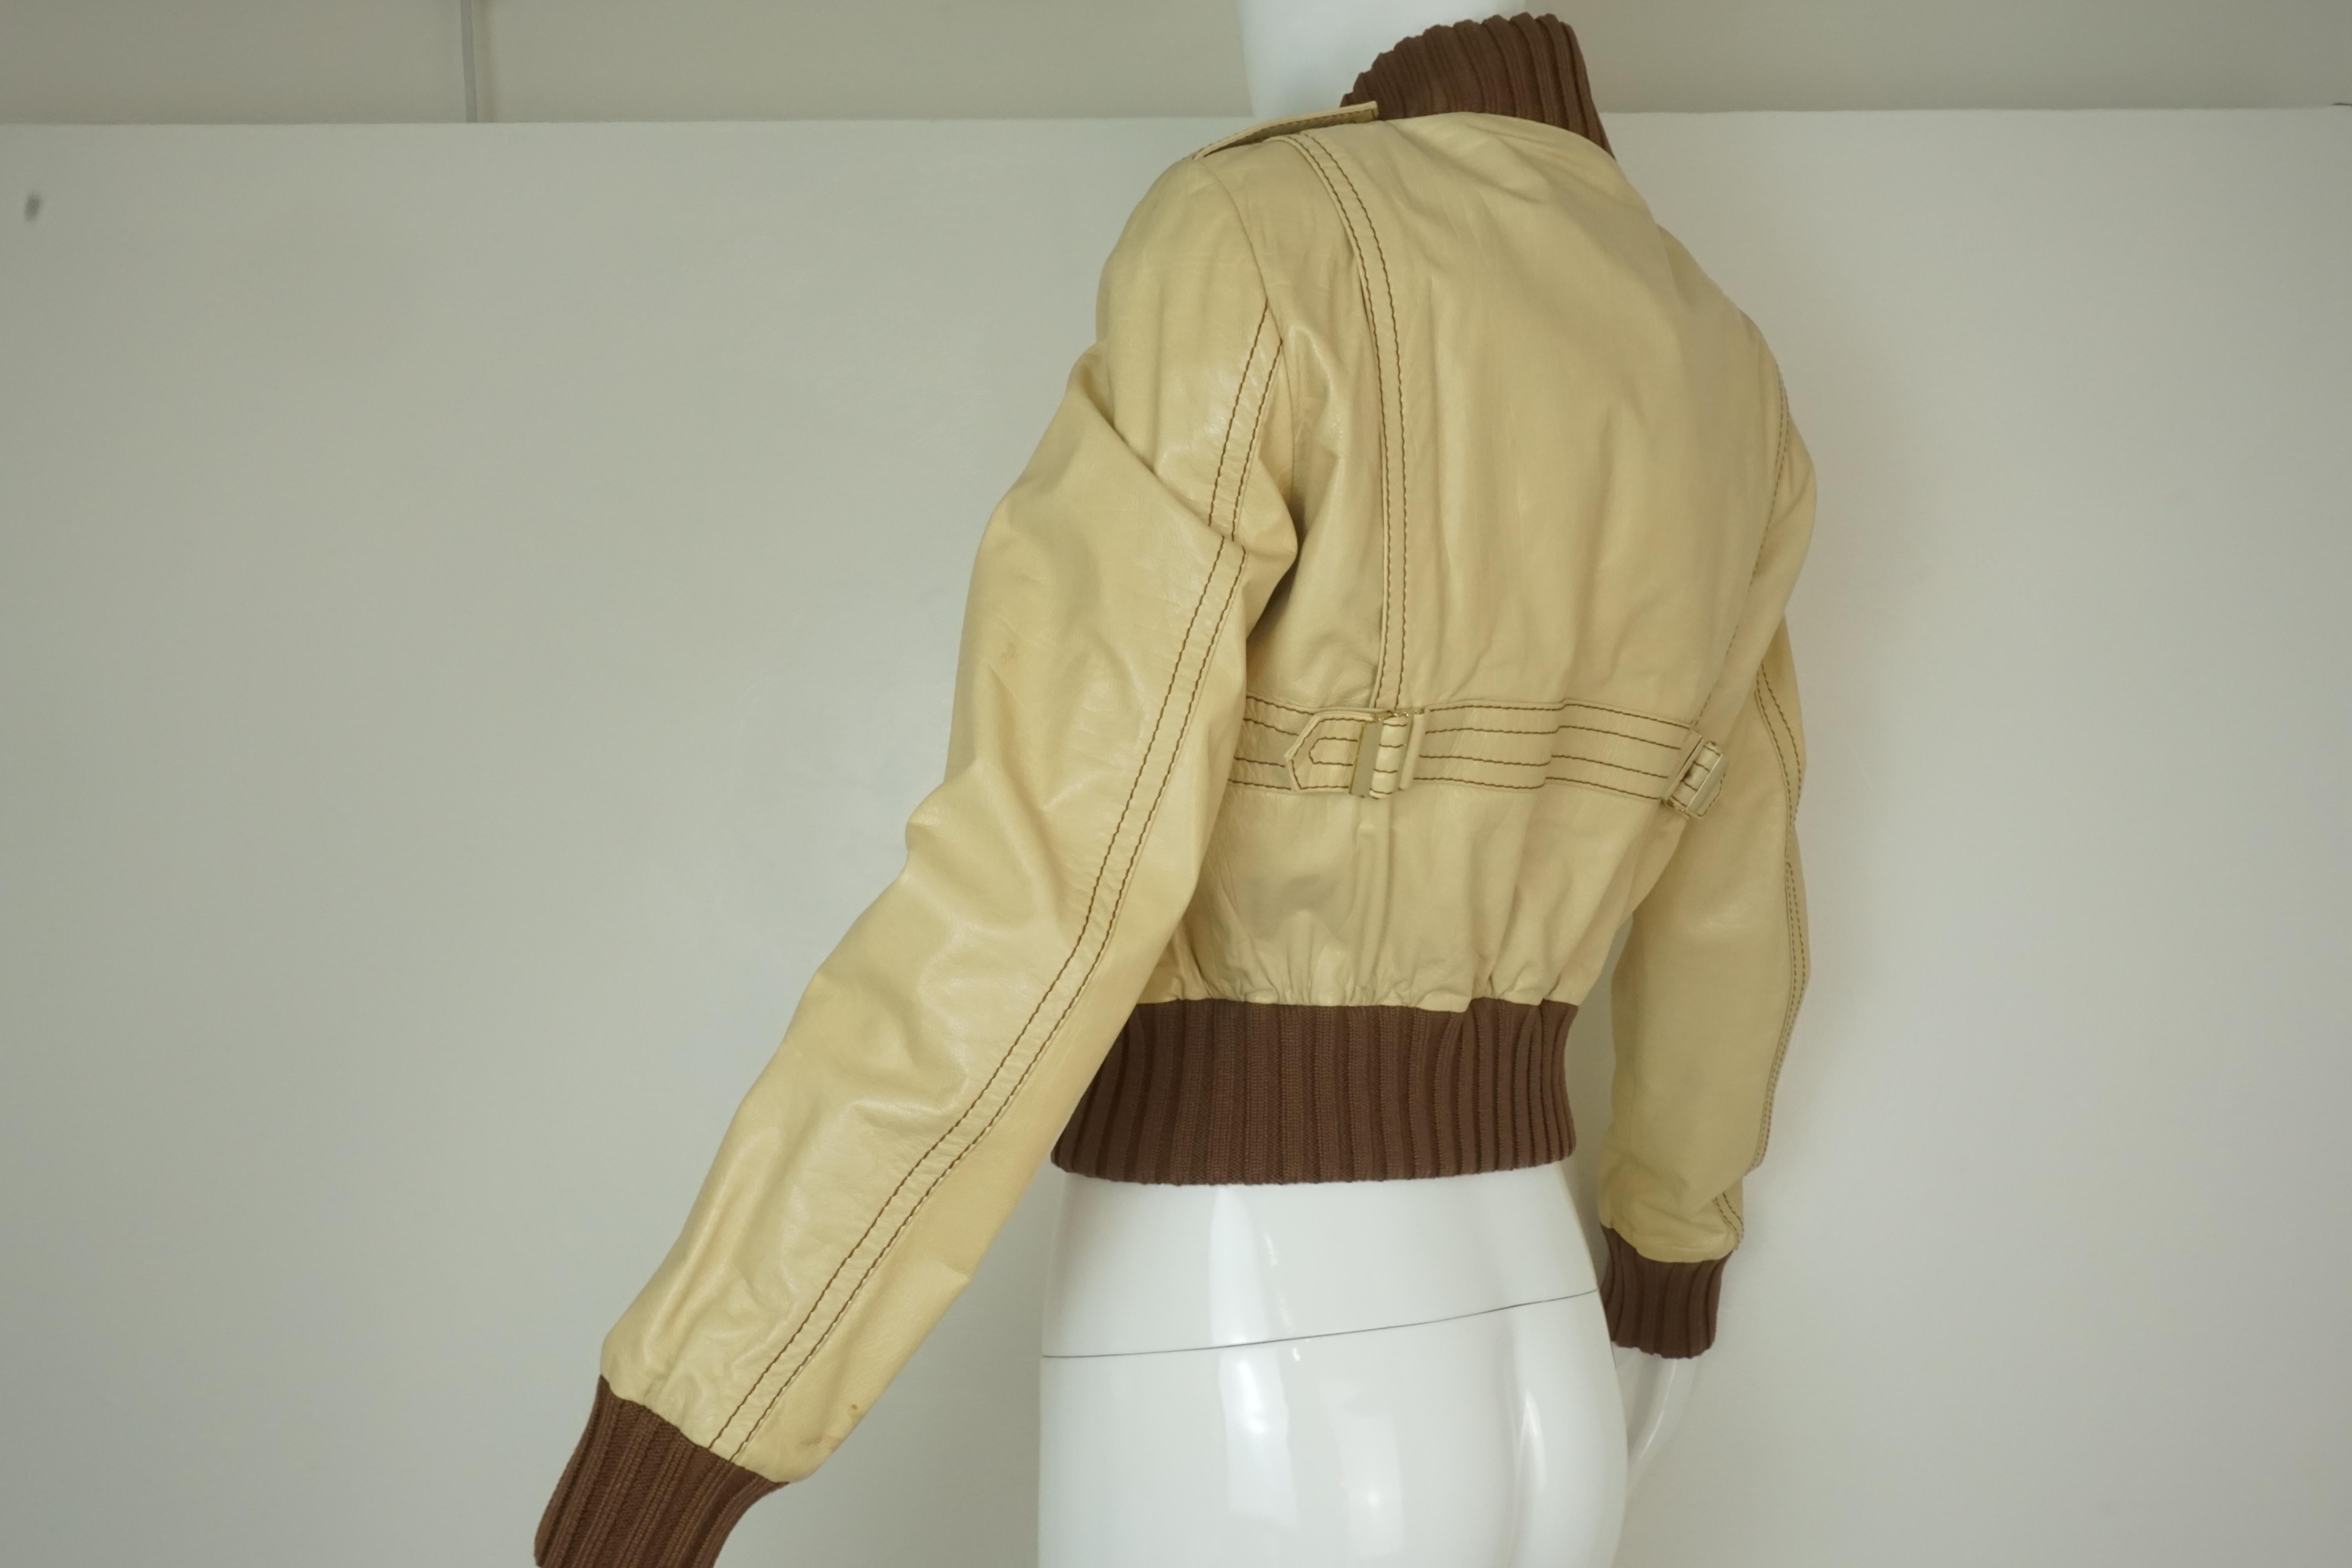 Gucci Cropped Leather Bomber Jacket w/ Knit Cuffs & Collar  In Excellent Condition For Sale In Carmel, CA